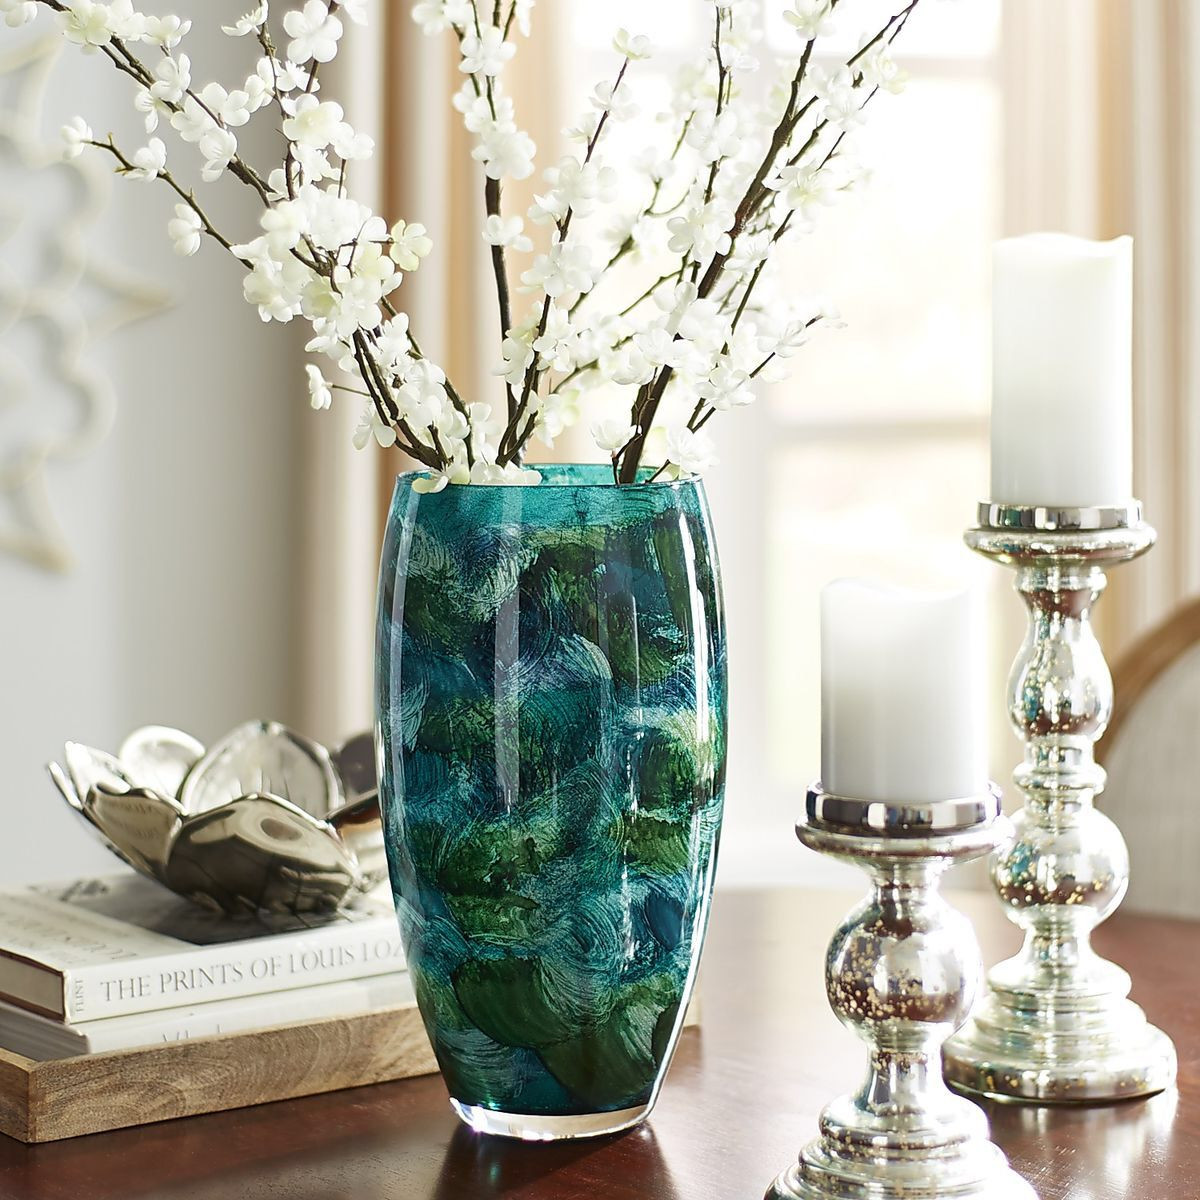 19 Fabulous Purple Swirl Vase 2023 free download purple swirl vase of love what they did with the vase home stuff pinterest in love what they did with the vase